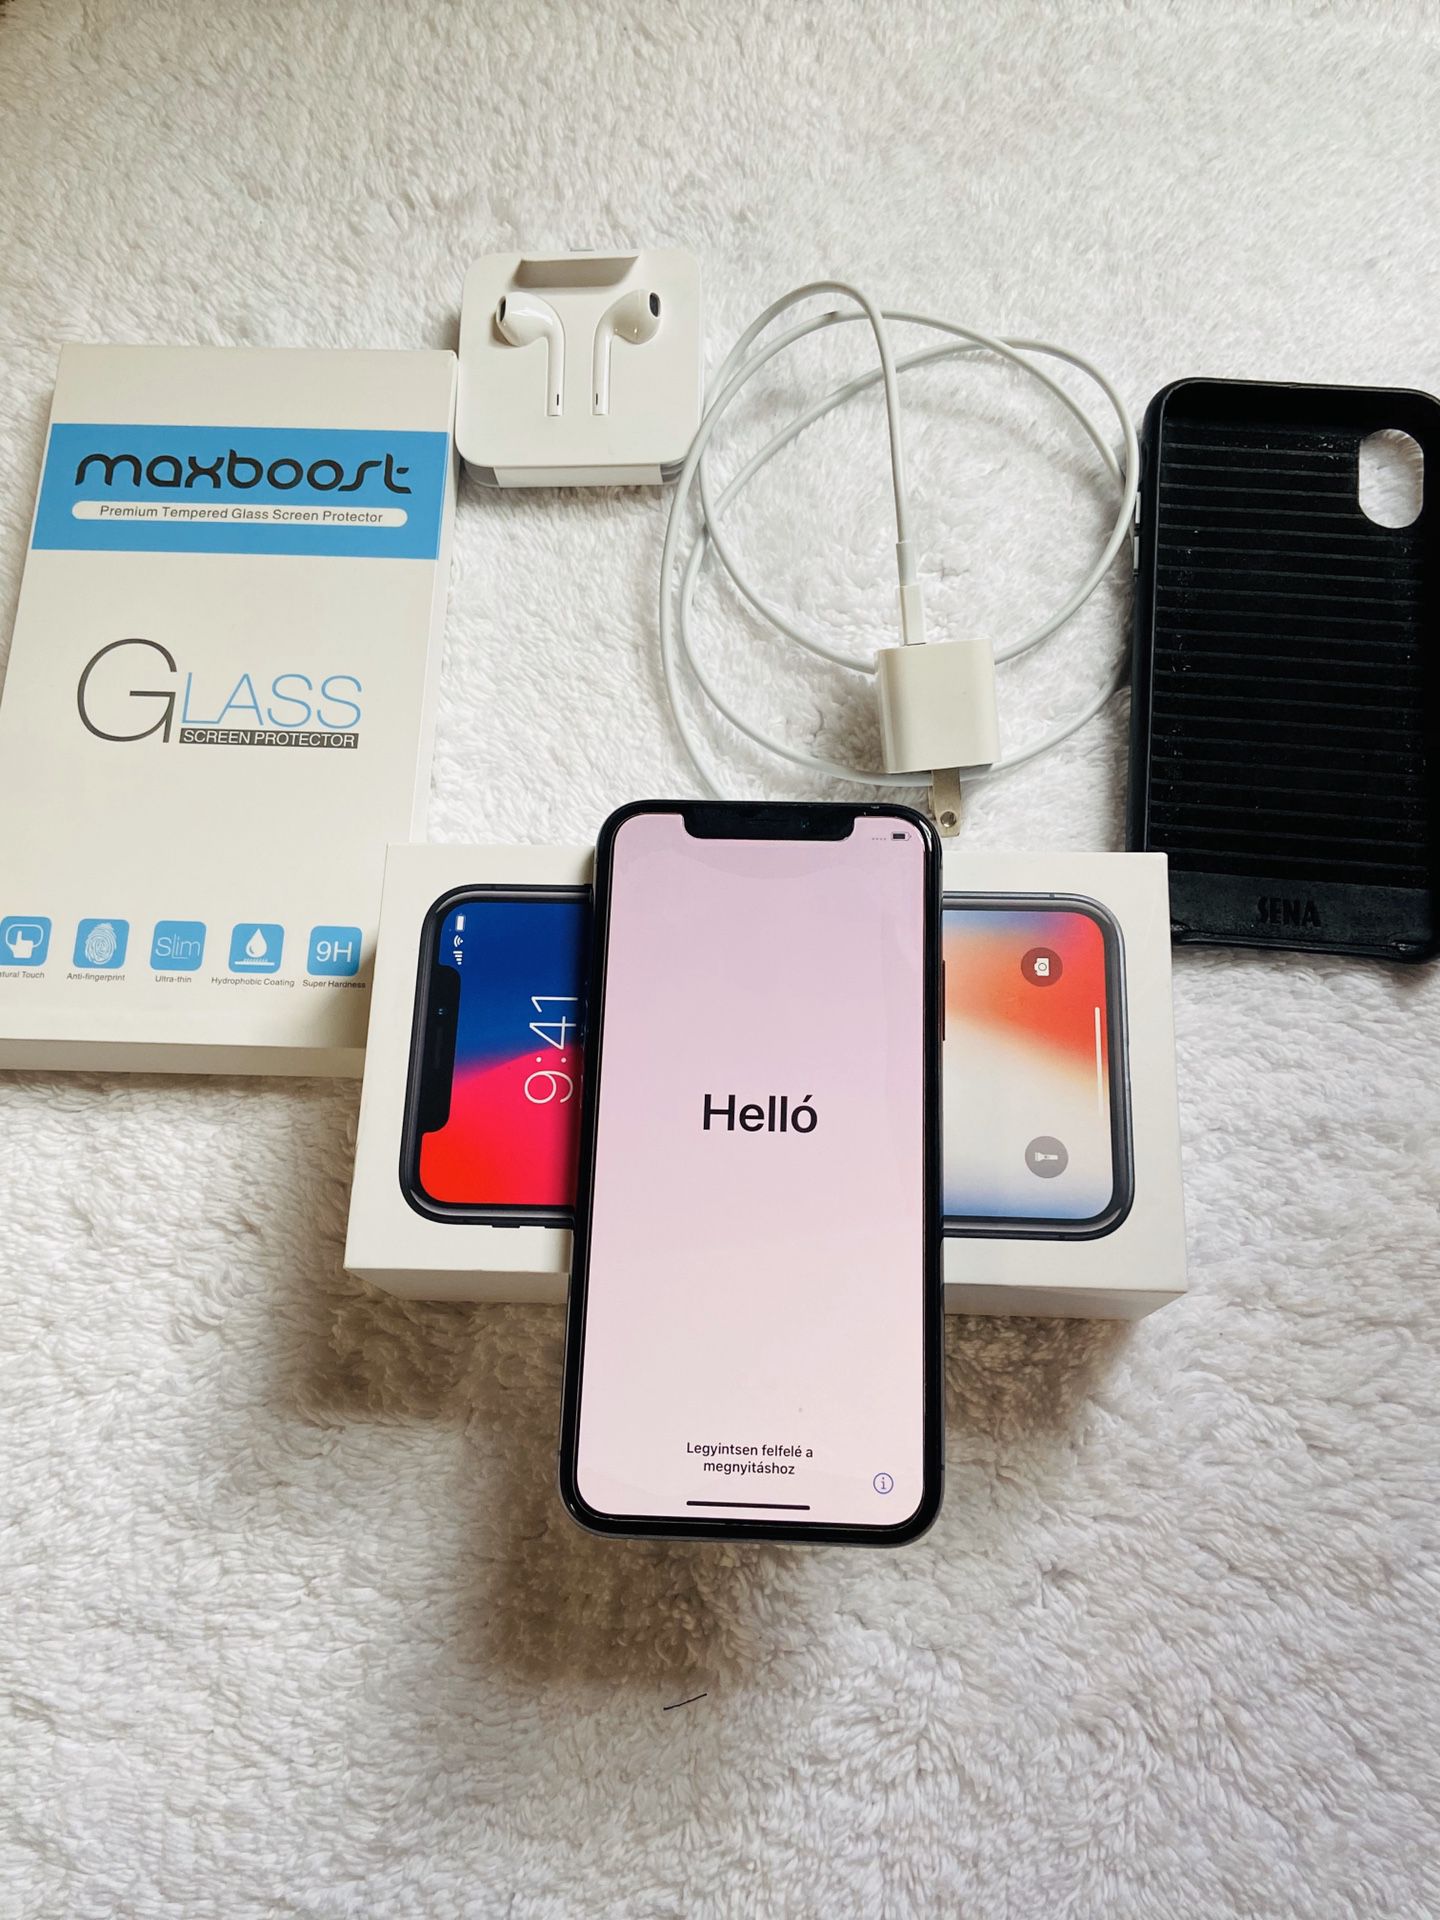 iPhone X - Space Gray, 256GB, Unlocked , Used with Box and Accessories